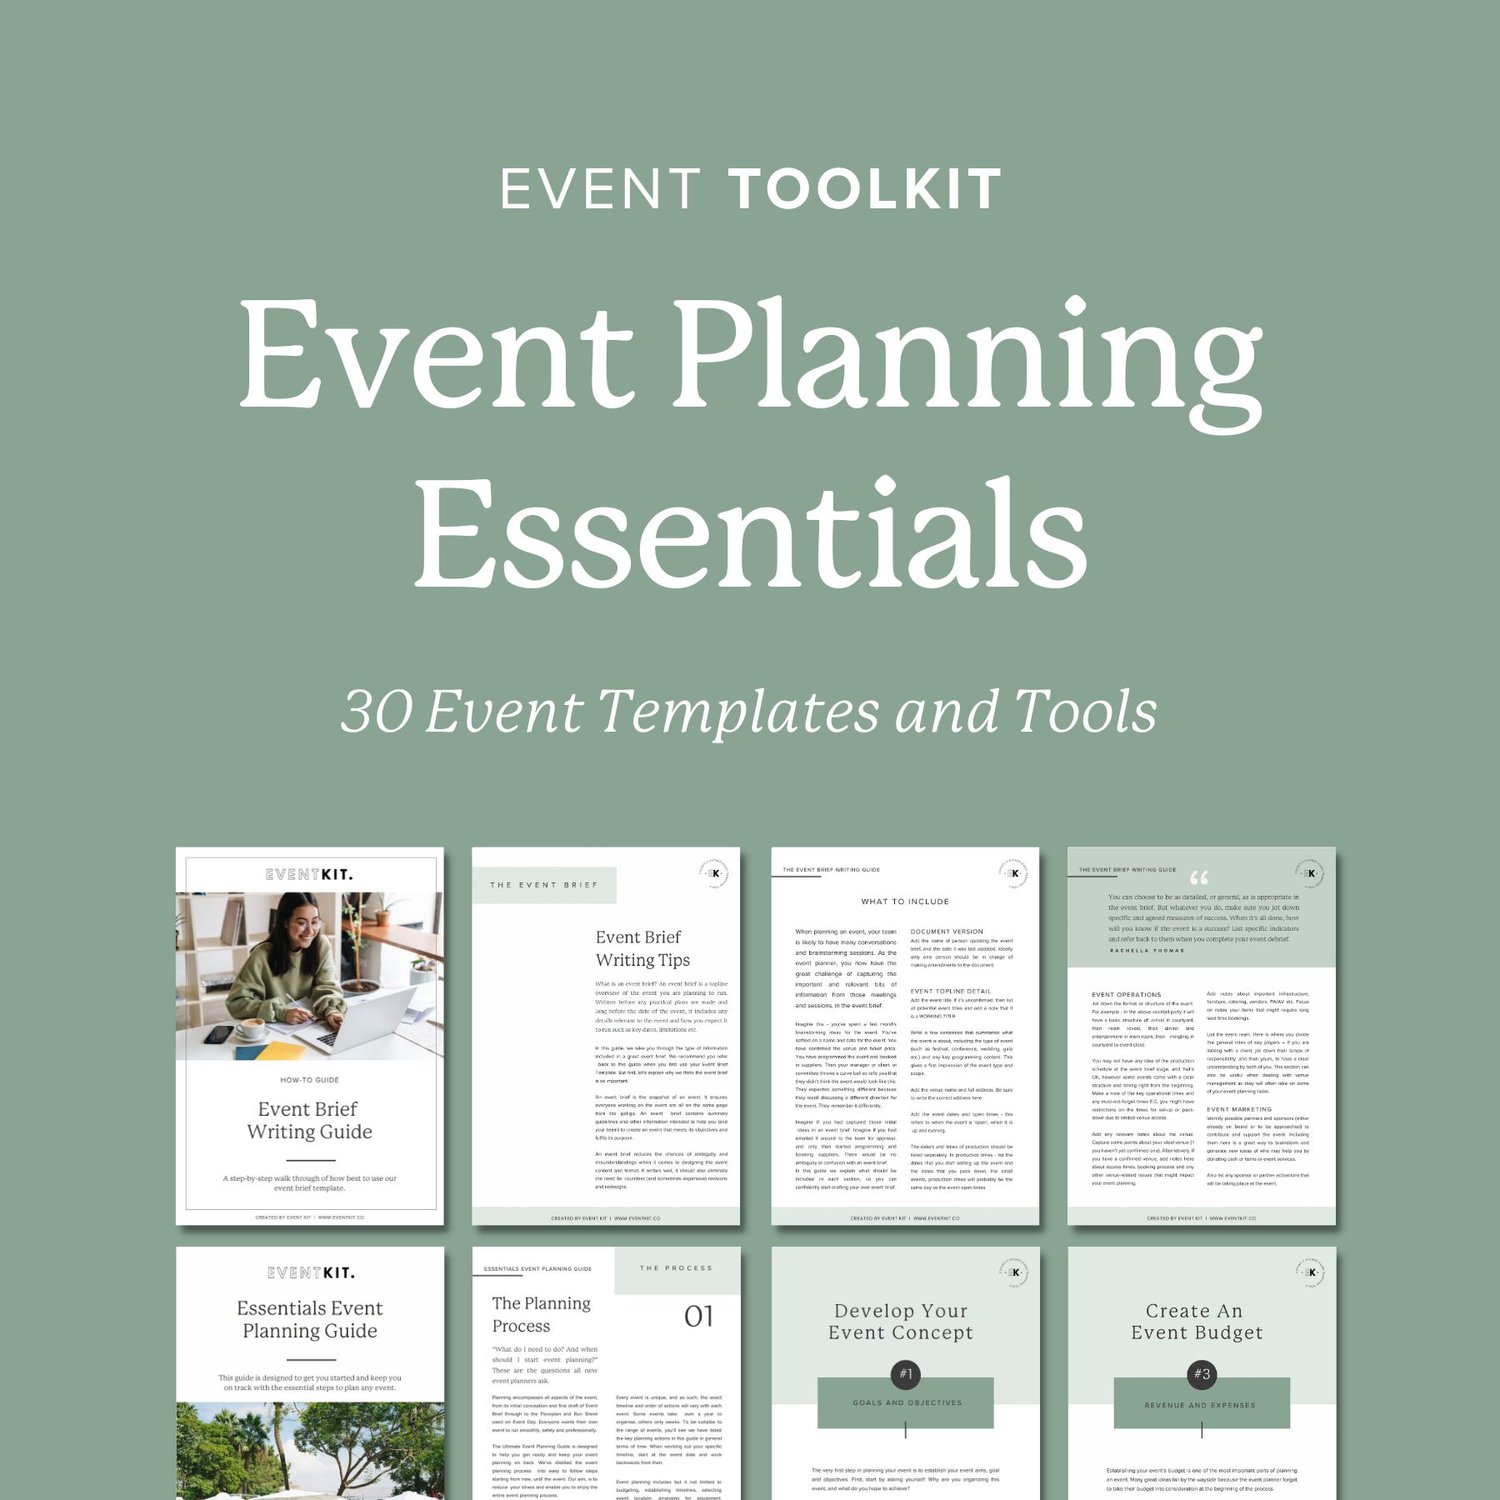 I. Introduction to Concert Planning Essentials